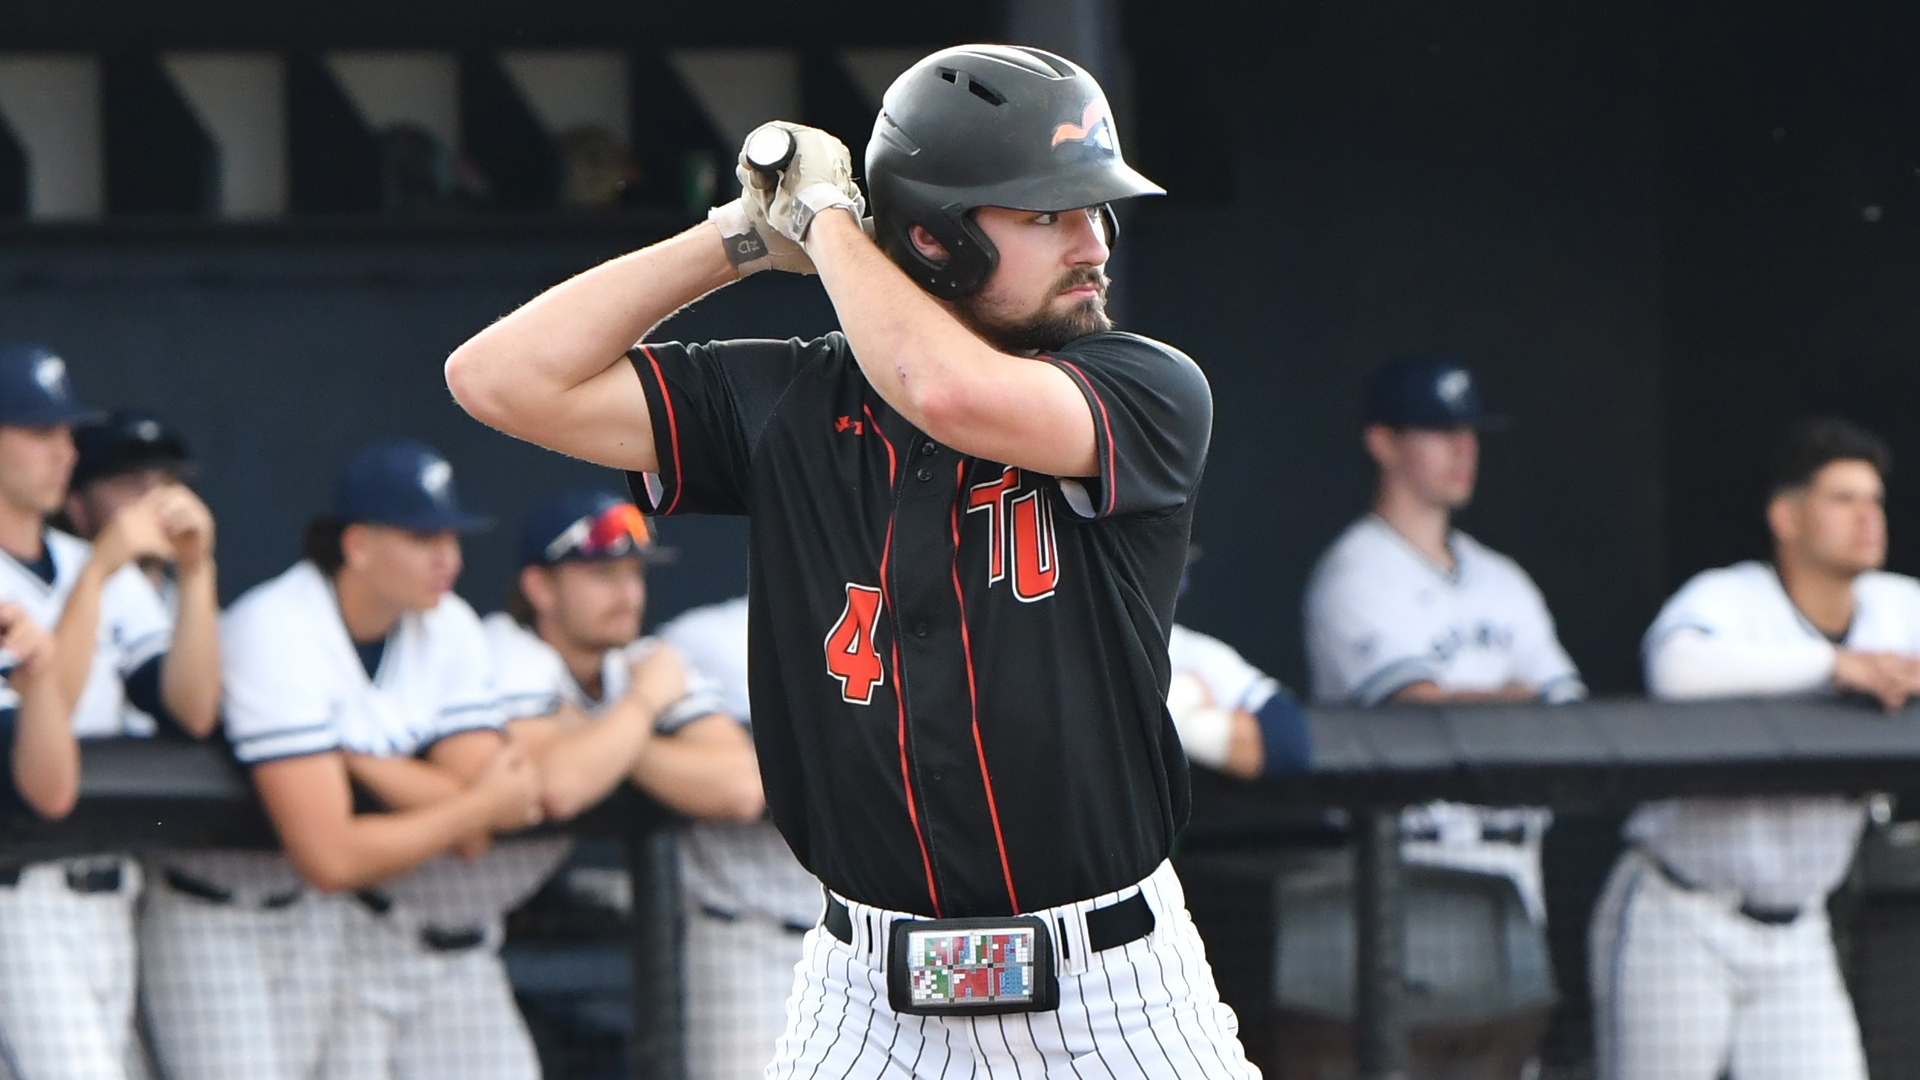 Flood has four-hit game in 10-7 win at Emory & Henry